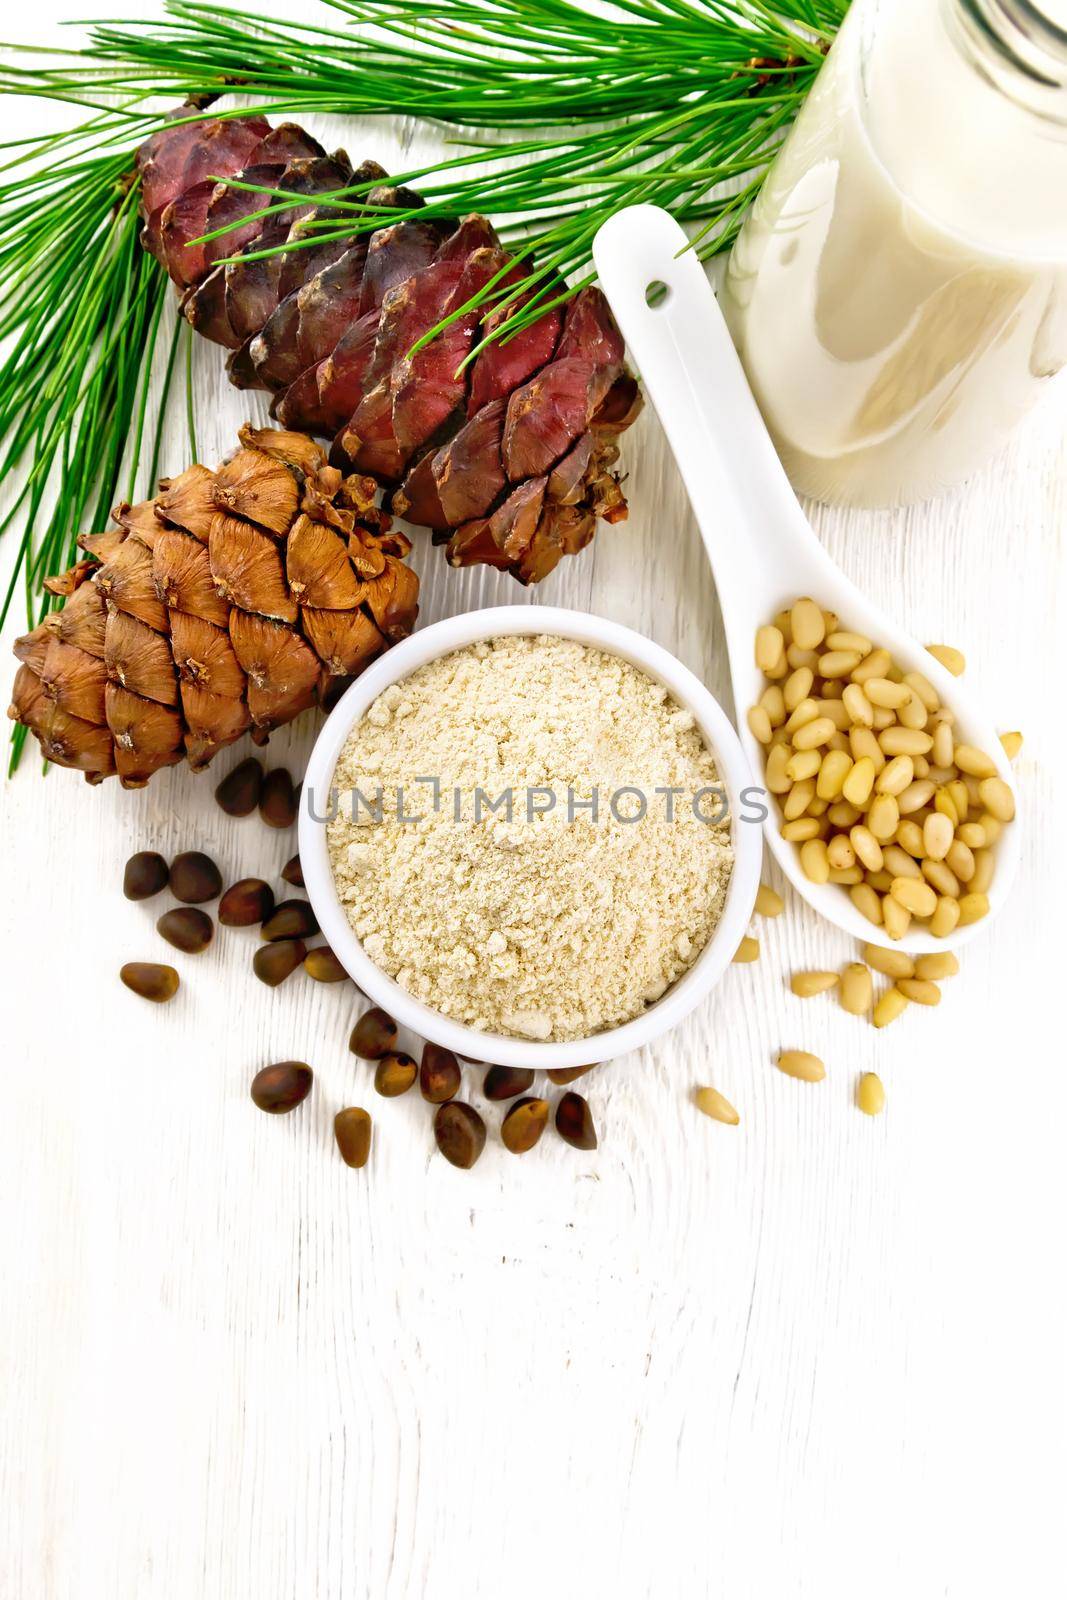 Cedar flour in a bowl, nuts and cones, spoon with peeled nuts, green pine branch and cedar milk in a bottle on white wooden board background from above